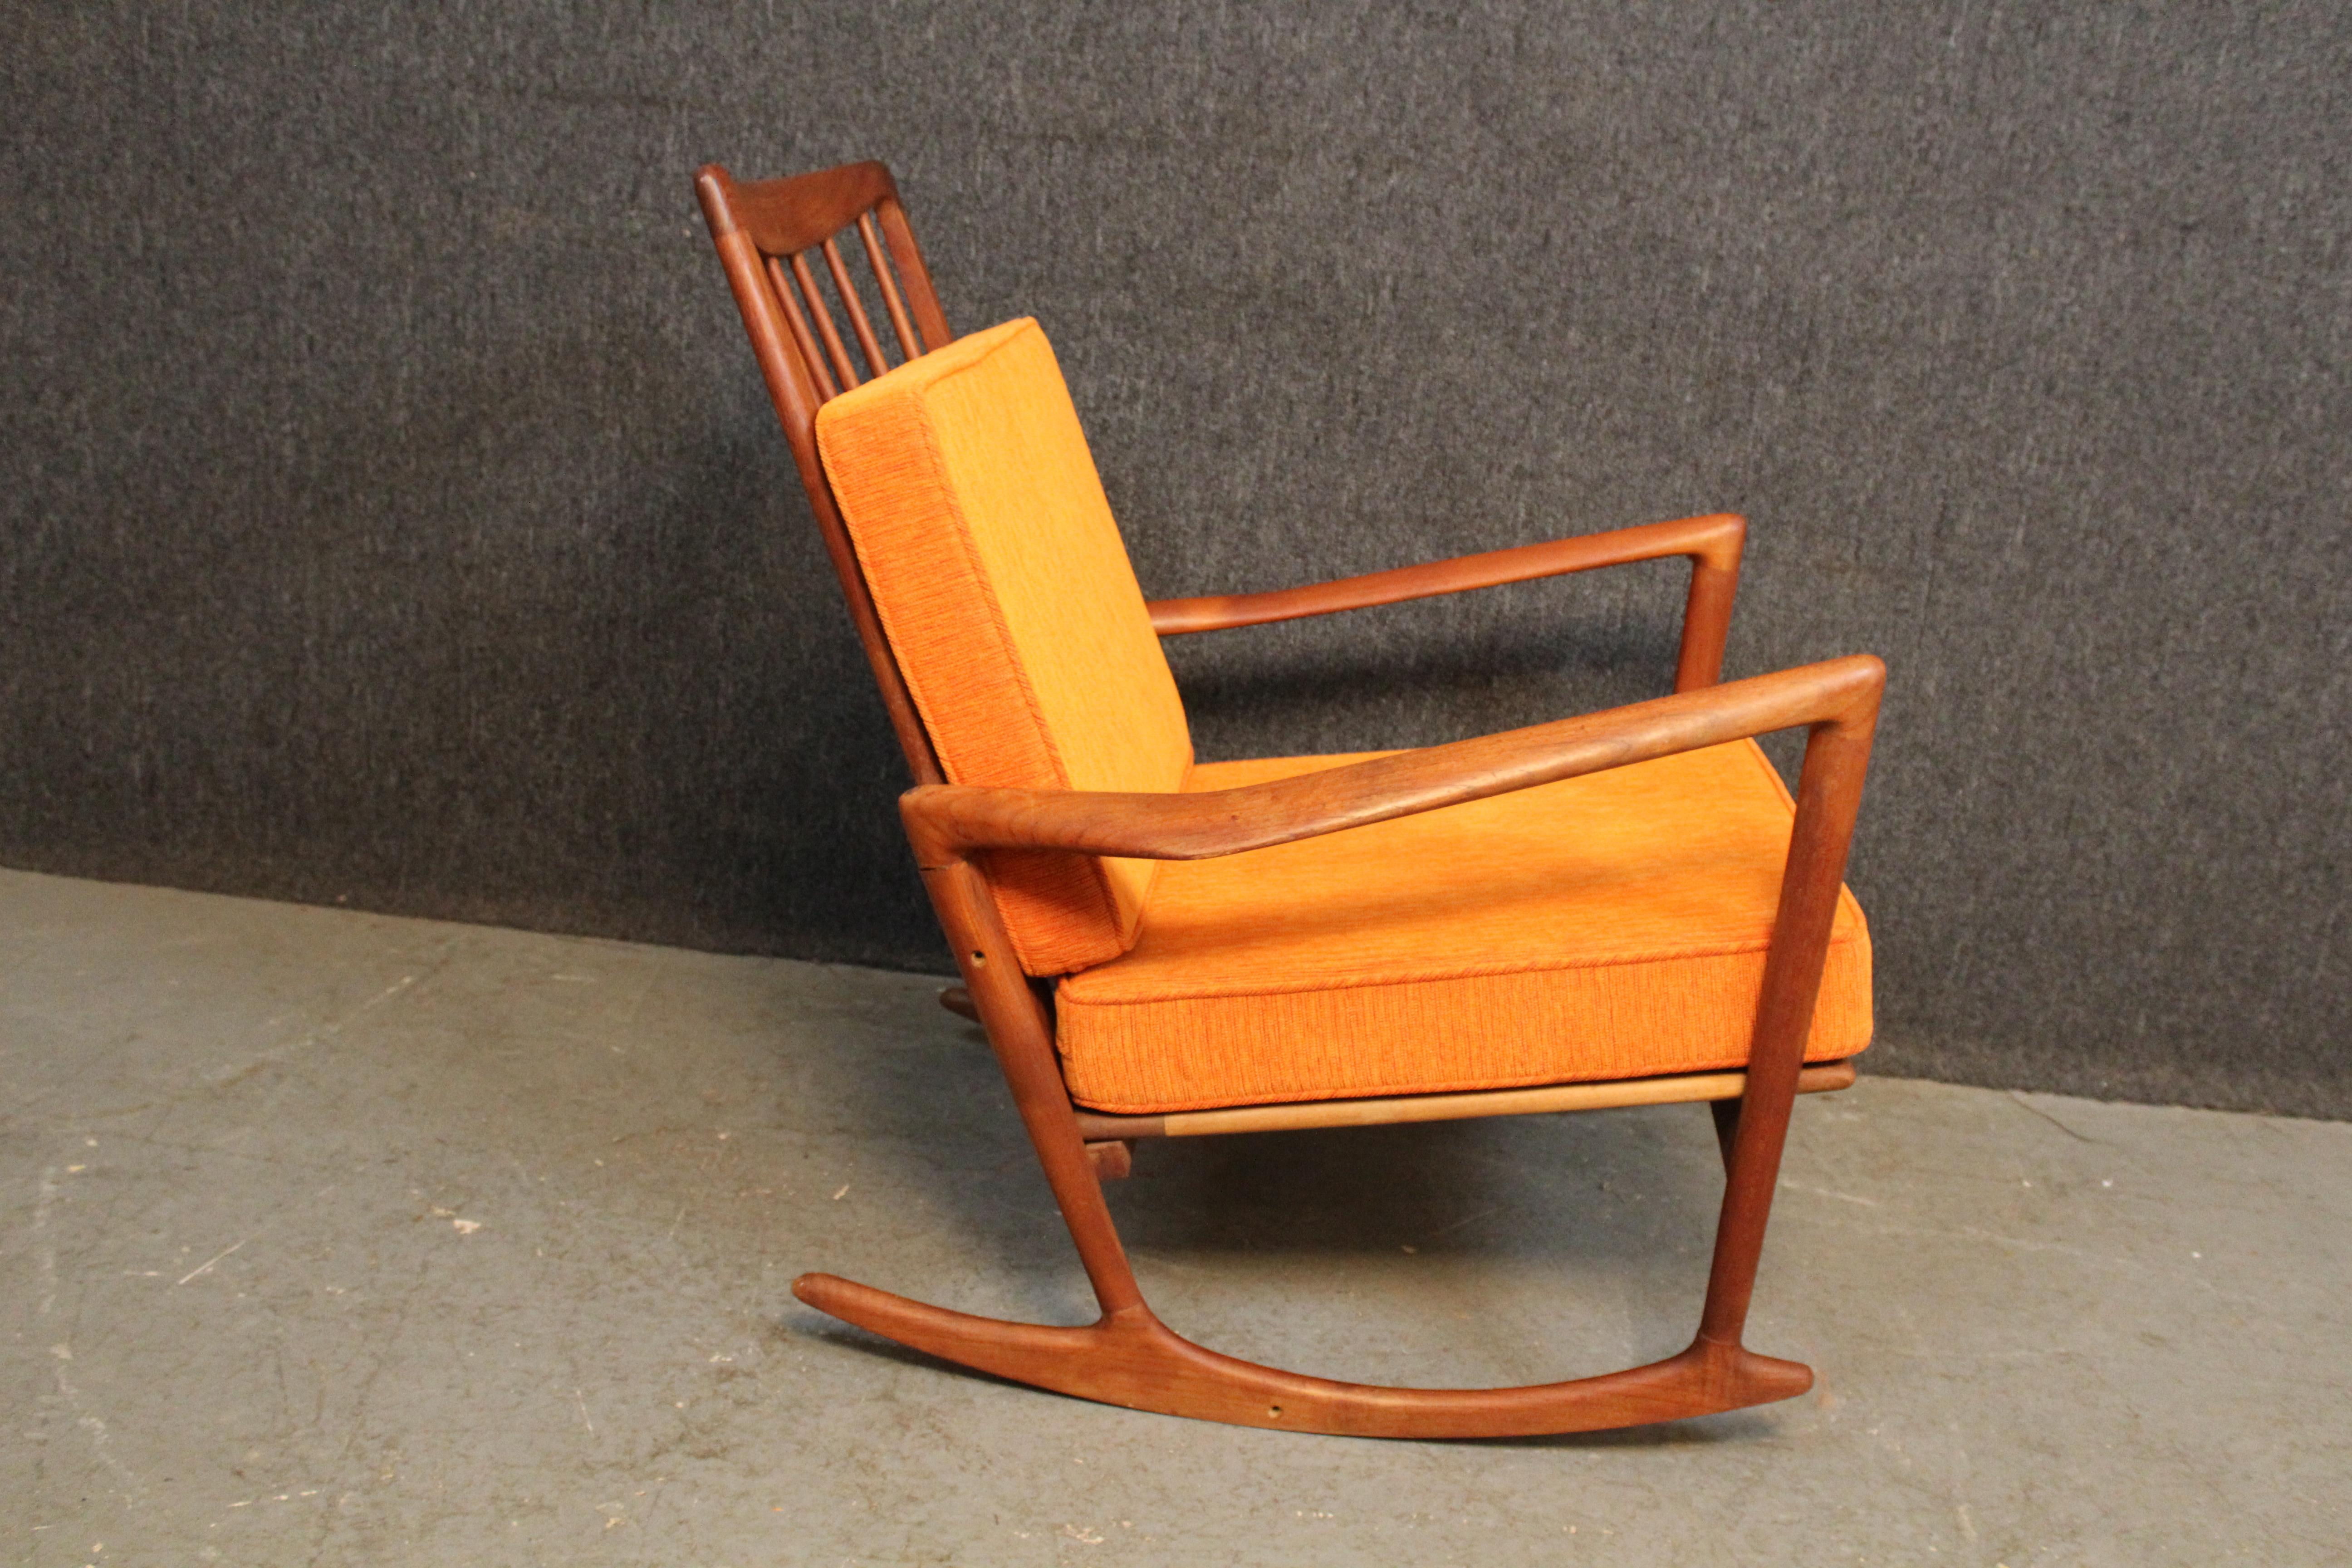 Vintage Sculptural Rocking Chair by Ib Kofod-Larsen for Selig Denmark In Good Condition For Sale In Brooklyn, NY